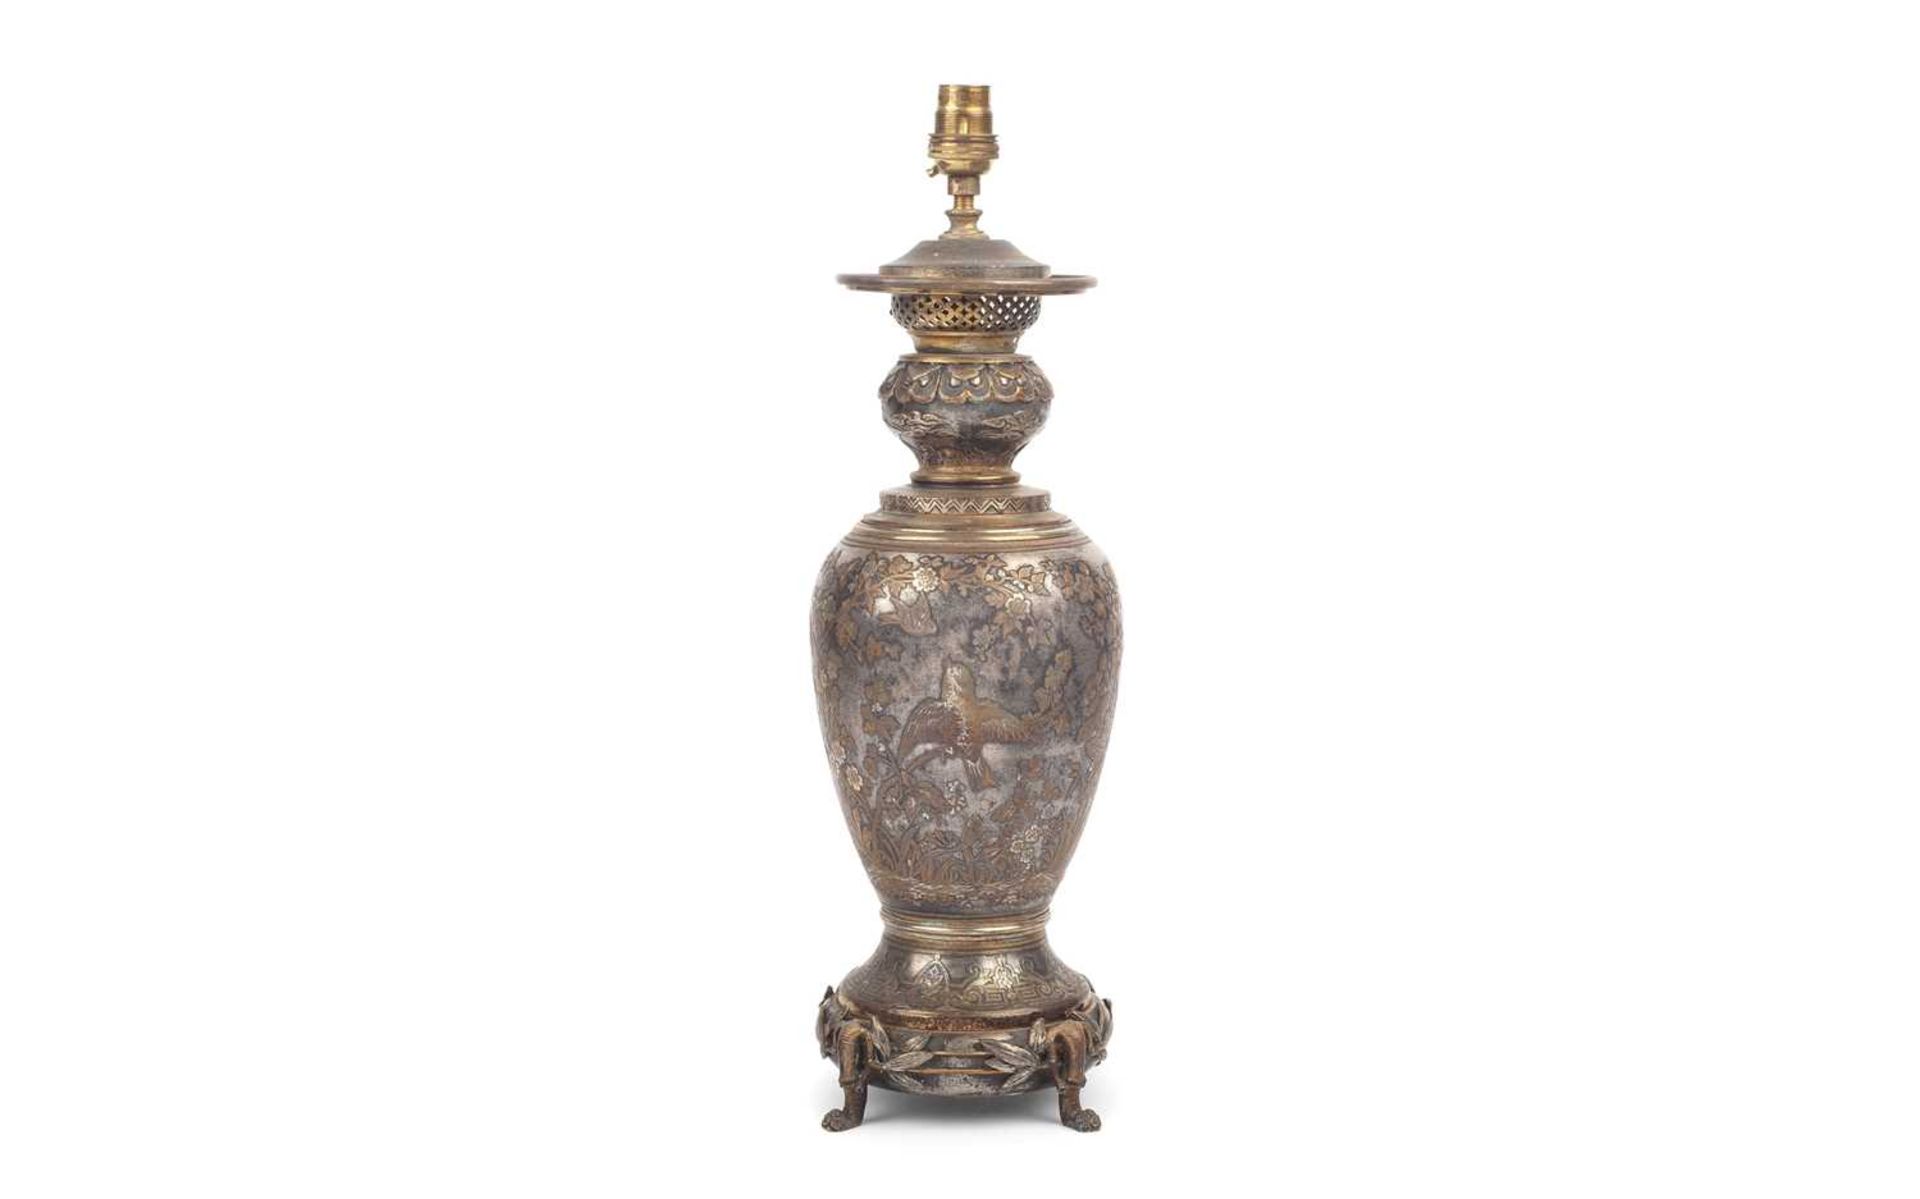 MANNER OF CHRISTOFLE & CIE: A FINE 19TH CENTURY FRENCH JAPONISME STYLE SILVERED METAL LAMP BASE - Image 2 of 5